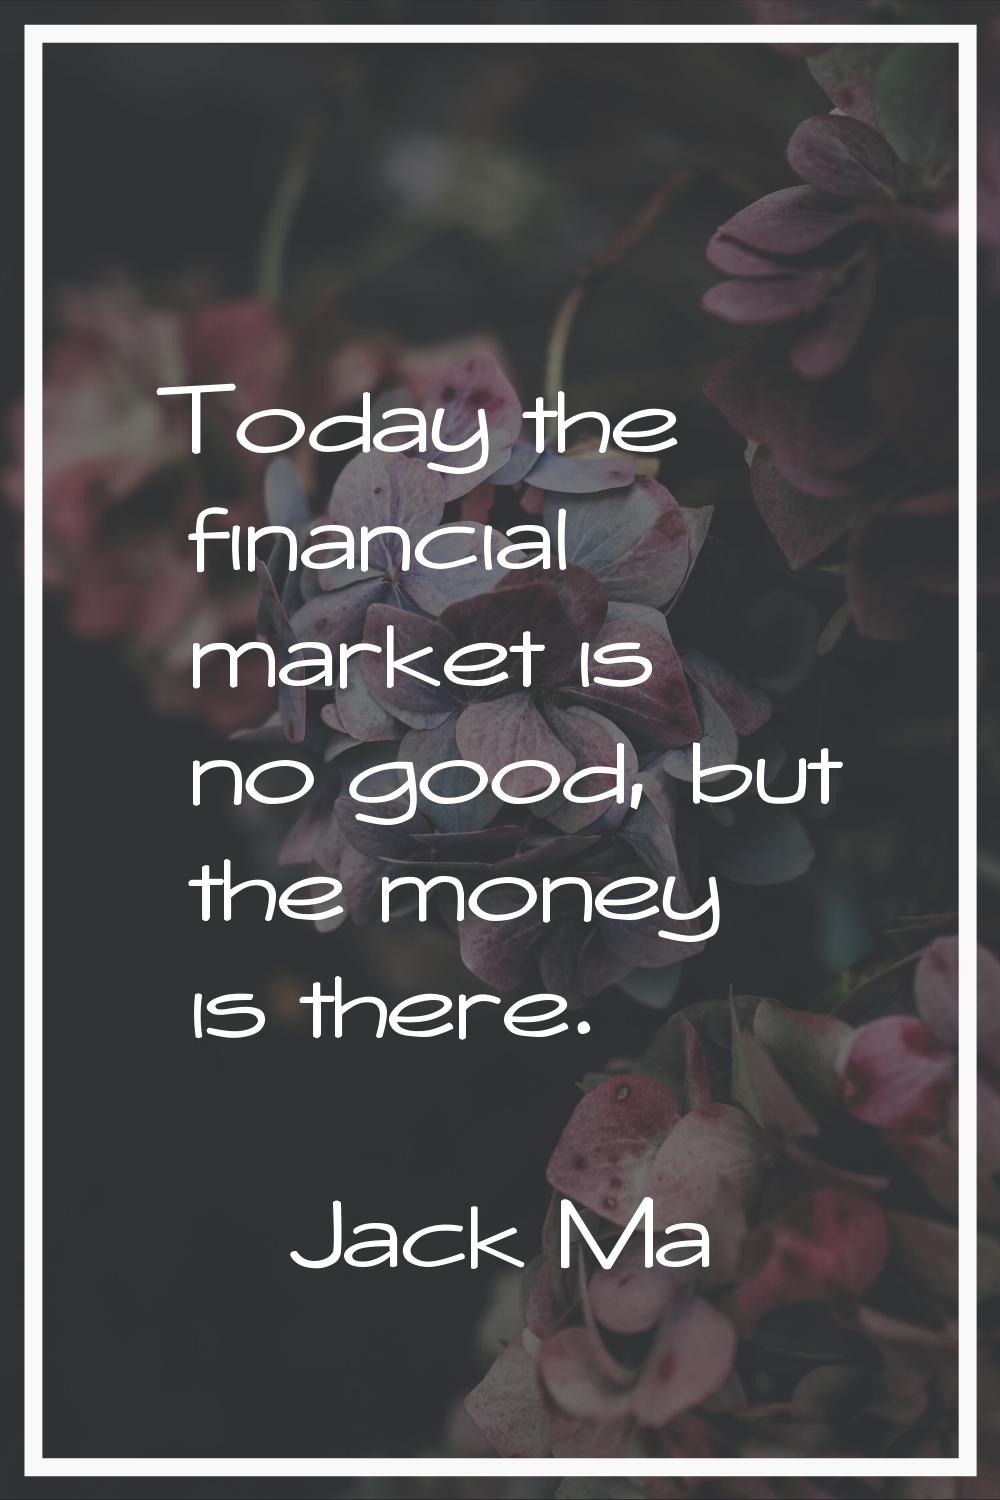 Today the financial market is no good, but the money is there.